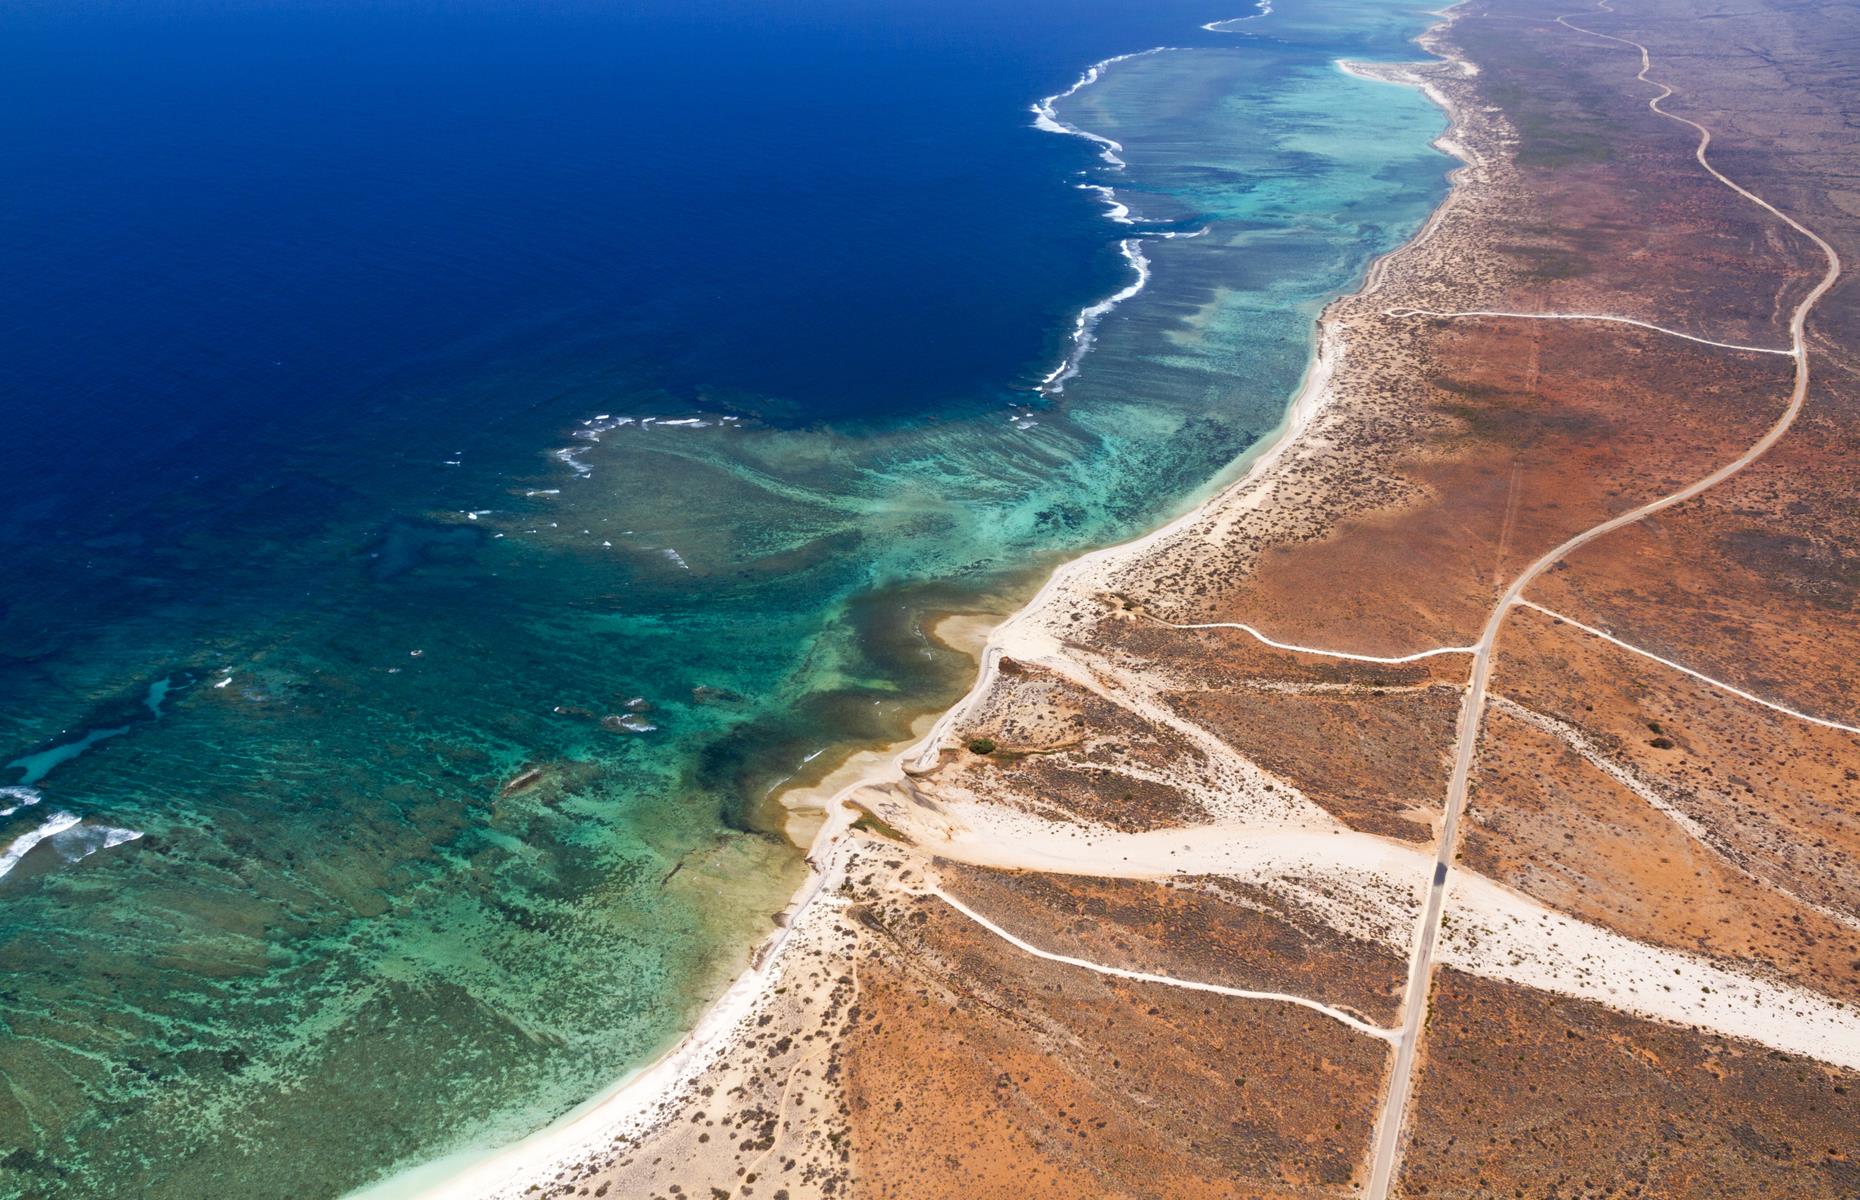 <p>The 800-mile (1,250km) <a href="https://www.australiascoralcoast.com/cch">Coral Coast Highway</a> from Perth to Exmouth is one of Australia’s ultimate campervan routes, skirting past some of the state’s most spectacular coastal scenery, otherworldly wonders and wildlife encounters, with some brilliant campsites en route. One of the first major stops after leaving Perth is the Pinnacles Desert, followed by the coastal city of Geraldton and onto the rugged landscape of Kalbarri National Park – well worth a stopover for hikes around its plunging gorges and to take the new Kalbarri Skywalk on the rim of Murchison Gorge for dizzying views. </p>